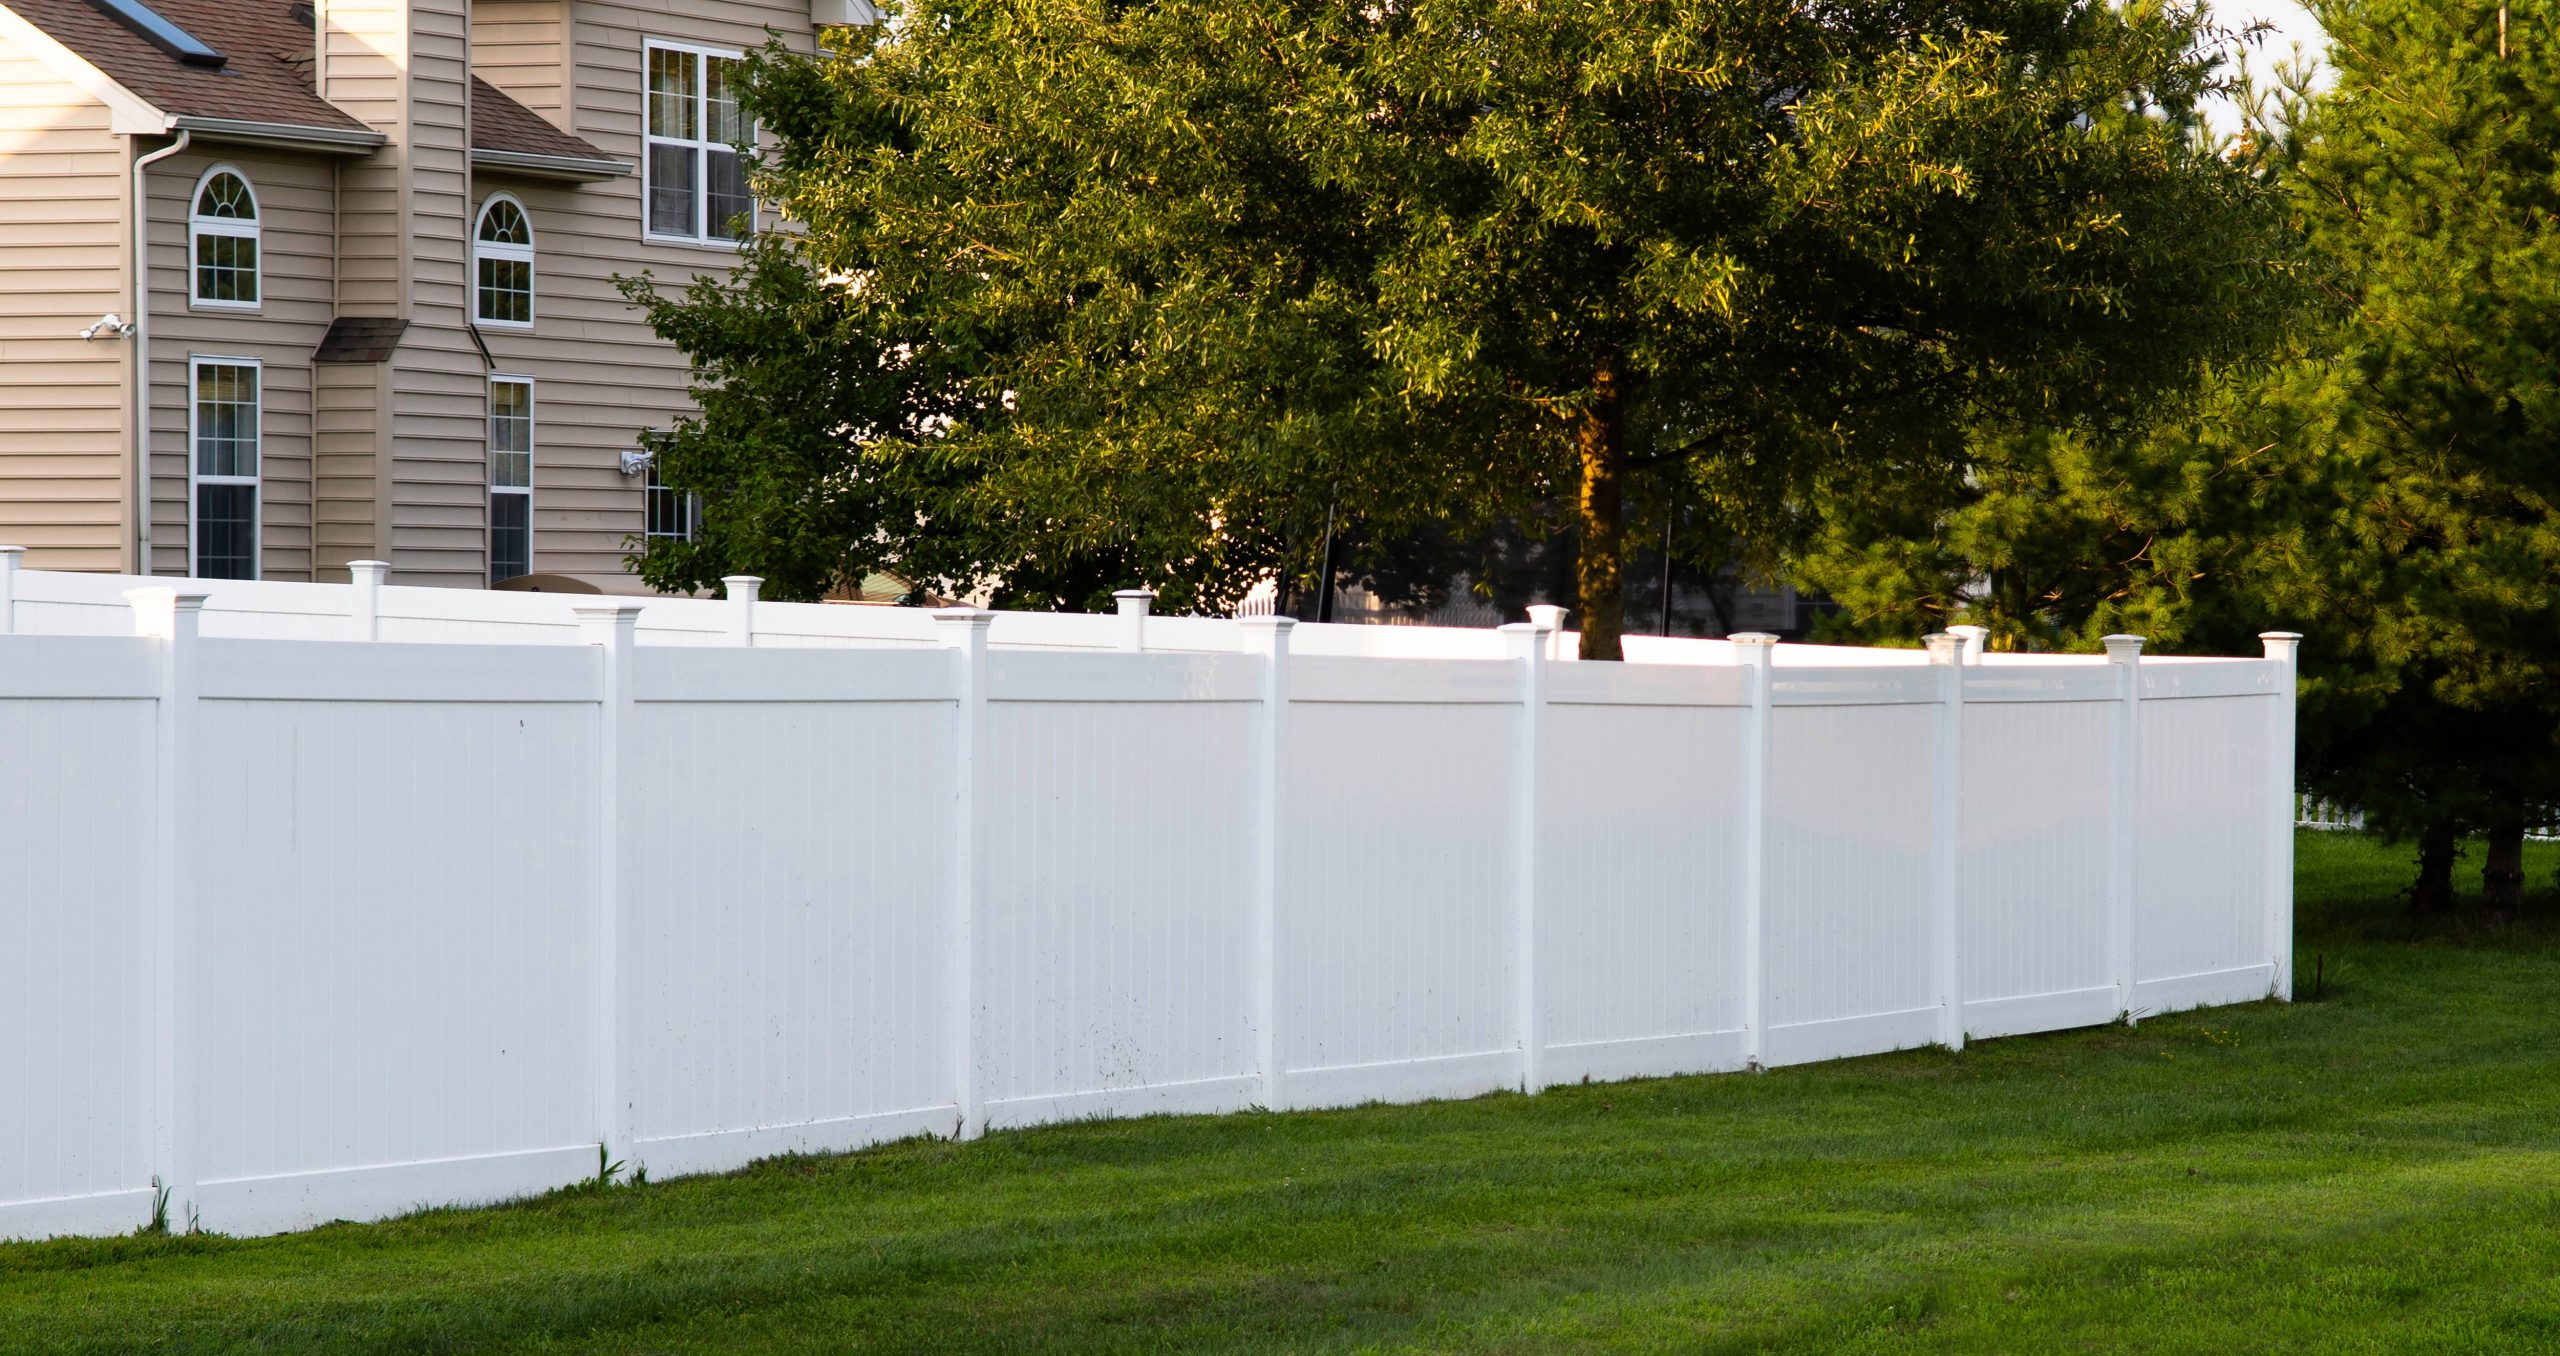 What Are the Pros and Cons of Installing Vinyl Privacy Fences in California?